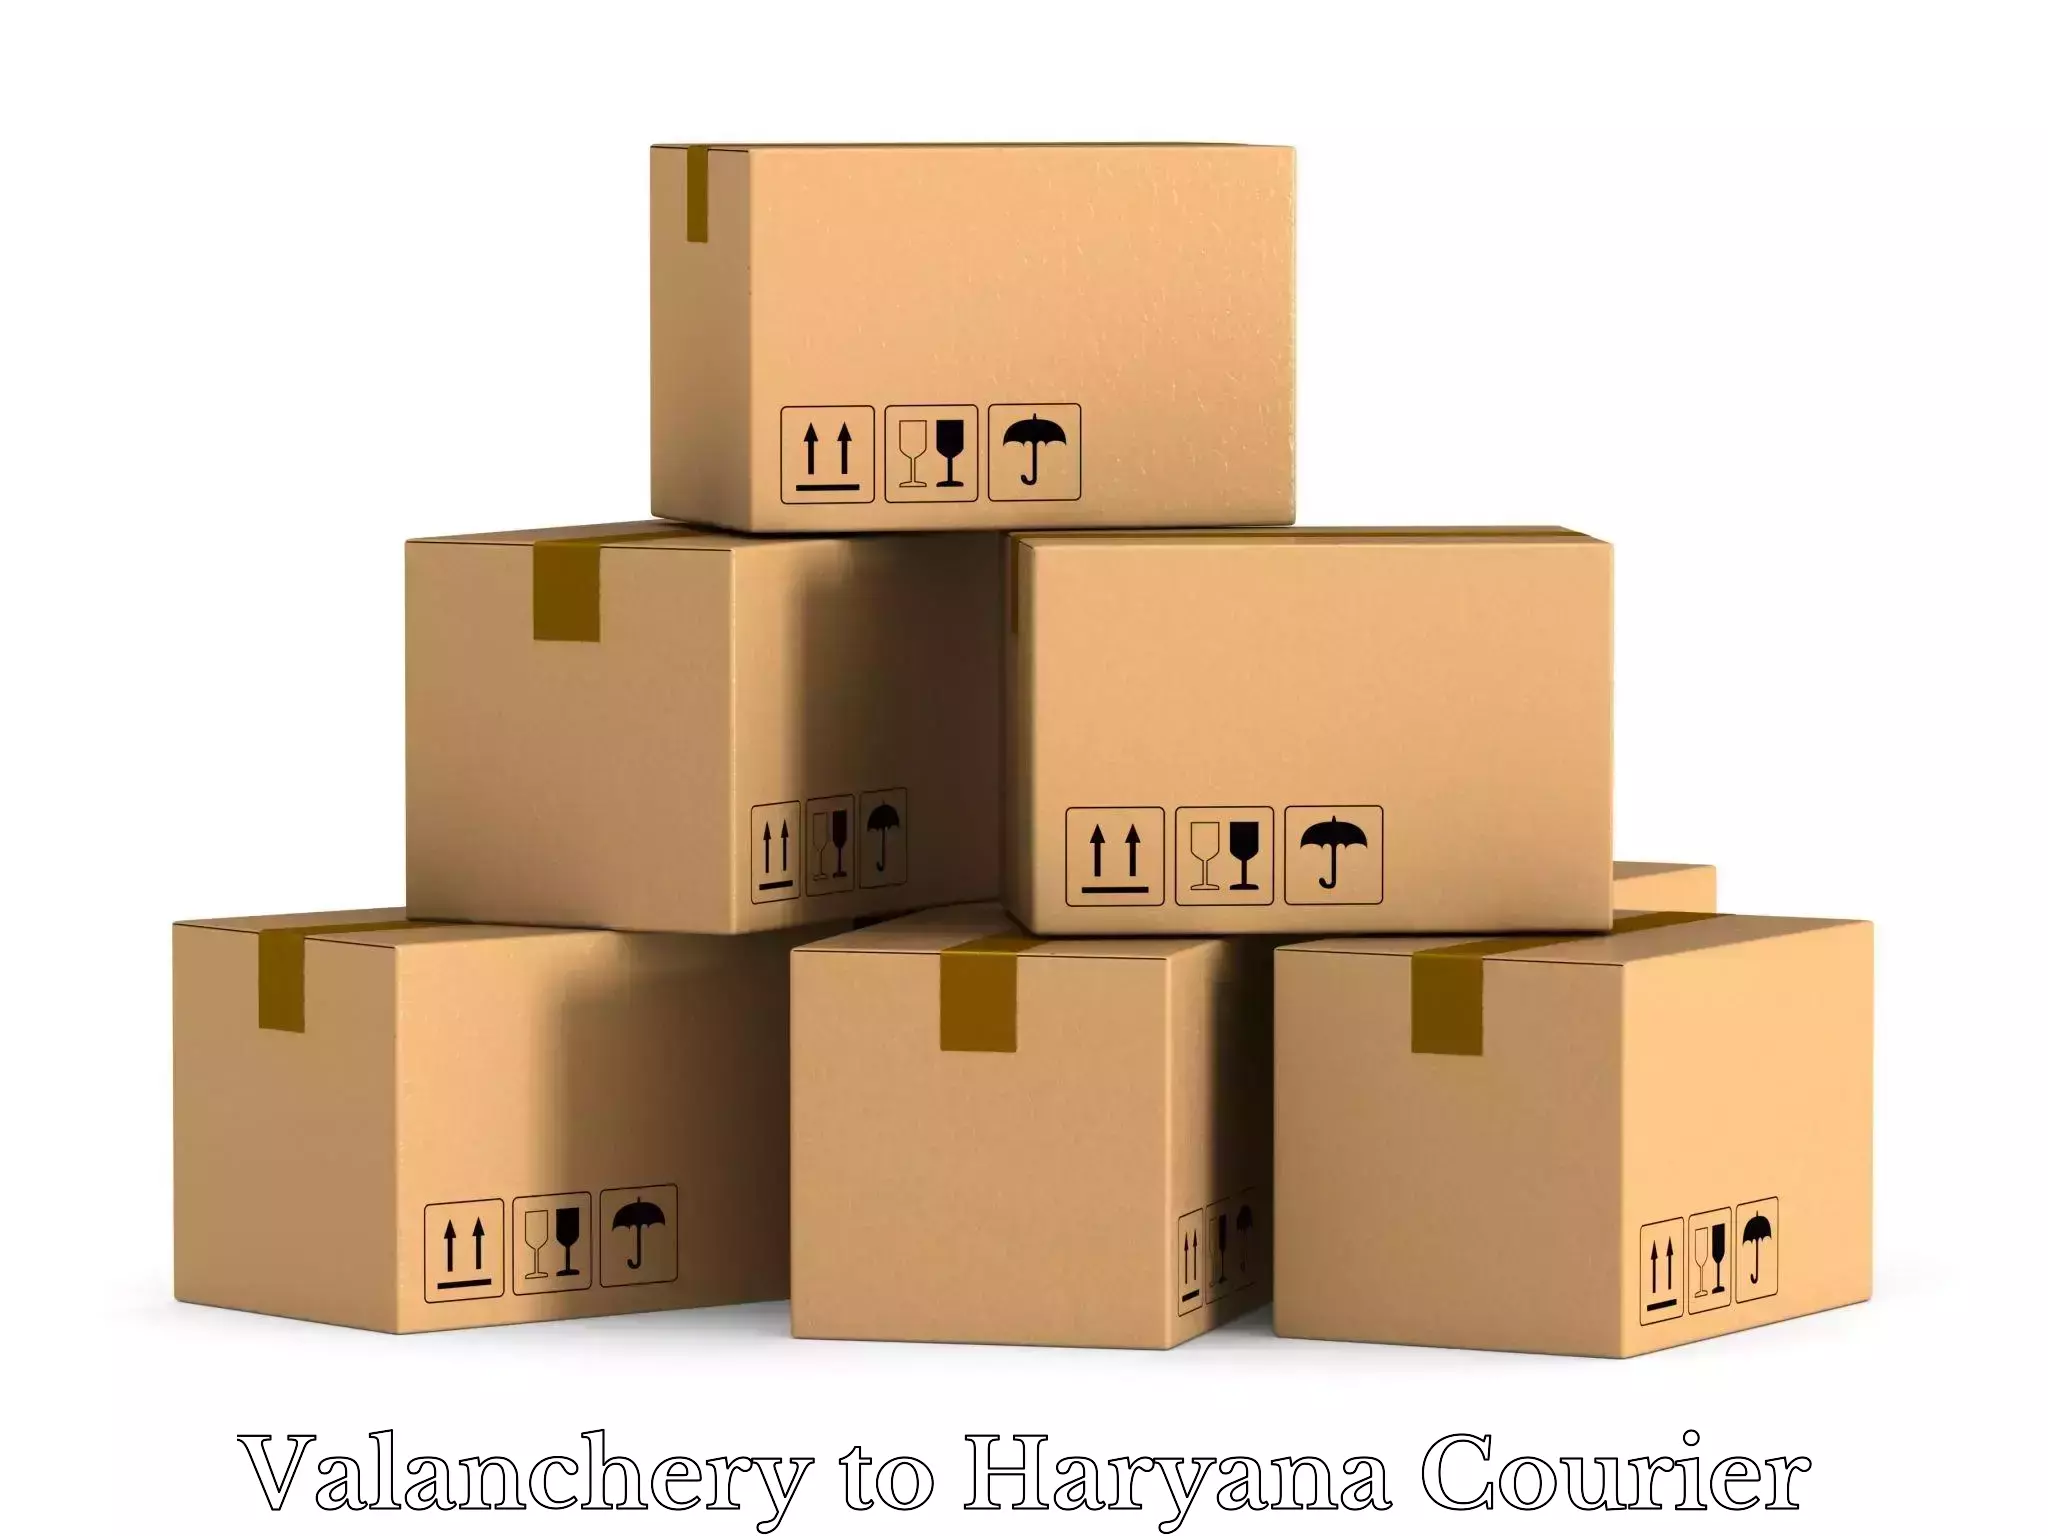 Personal effects shipping in Valanchery to Haryana